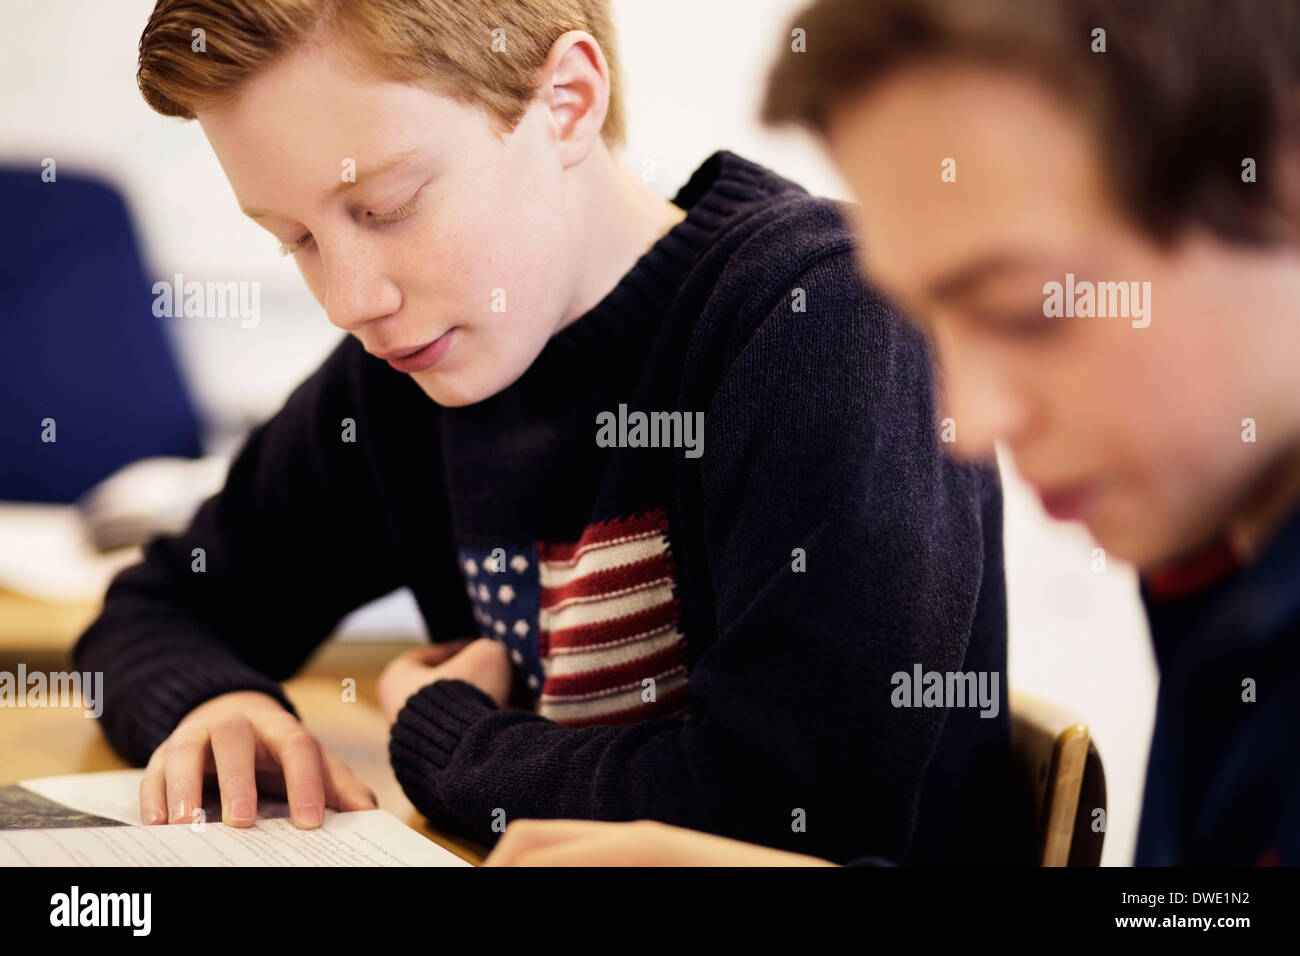 High school boys studying together in classroom Stock Photo